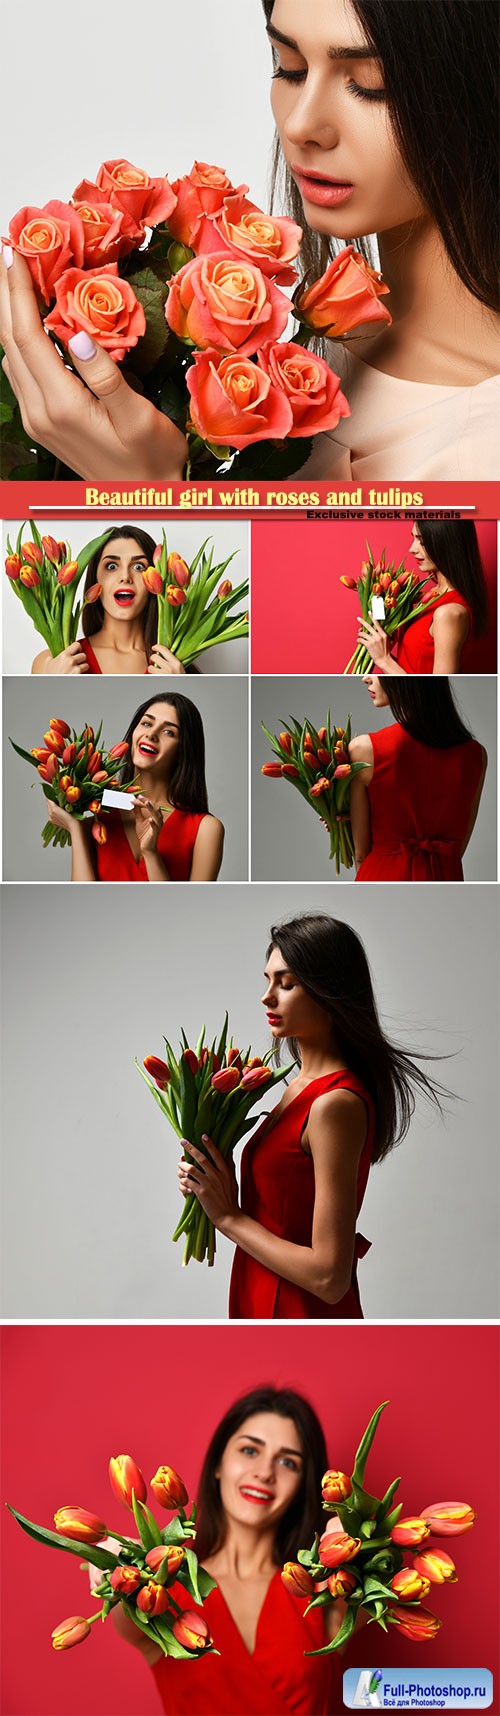 Beautiful girl with roses and tulips